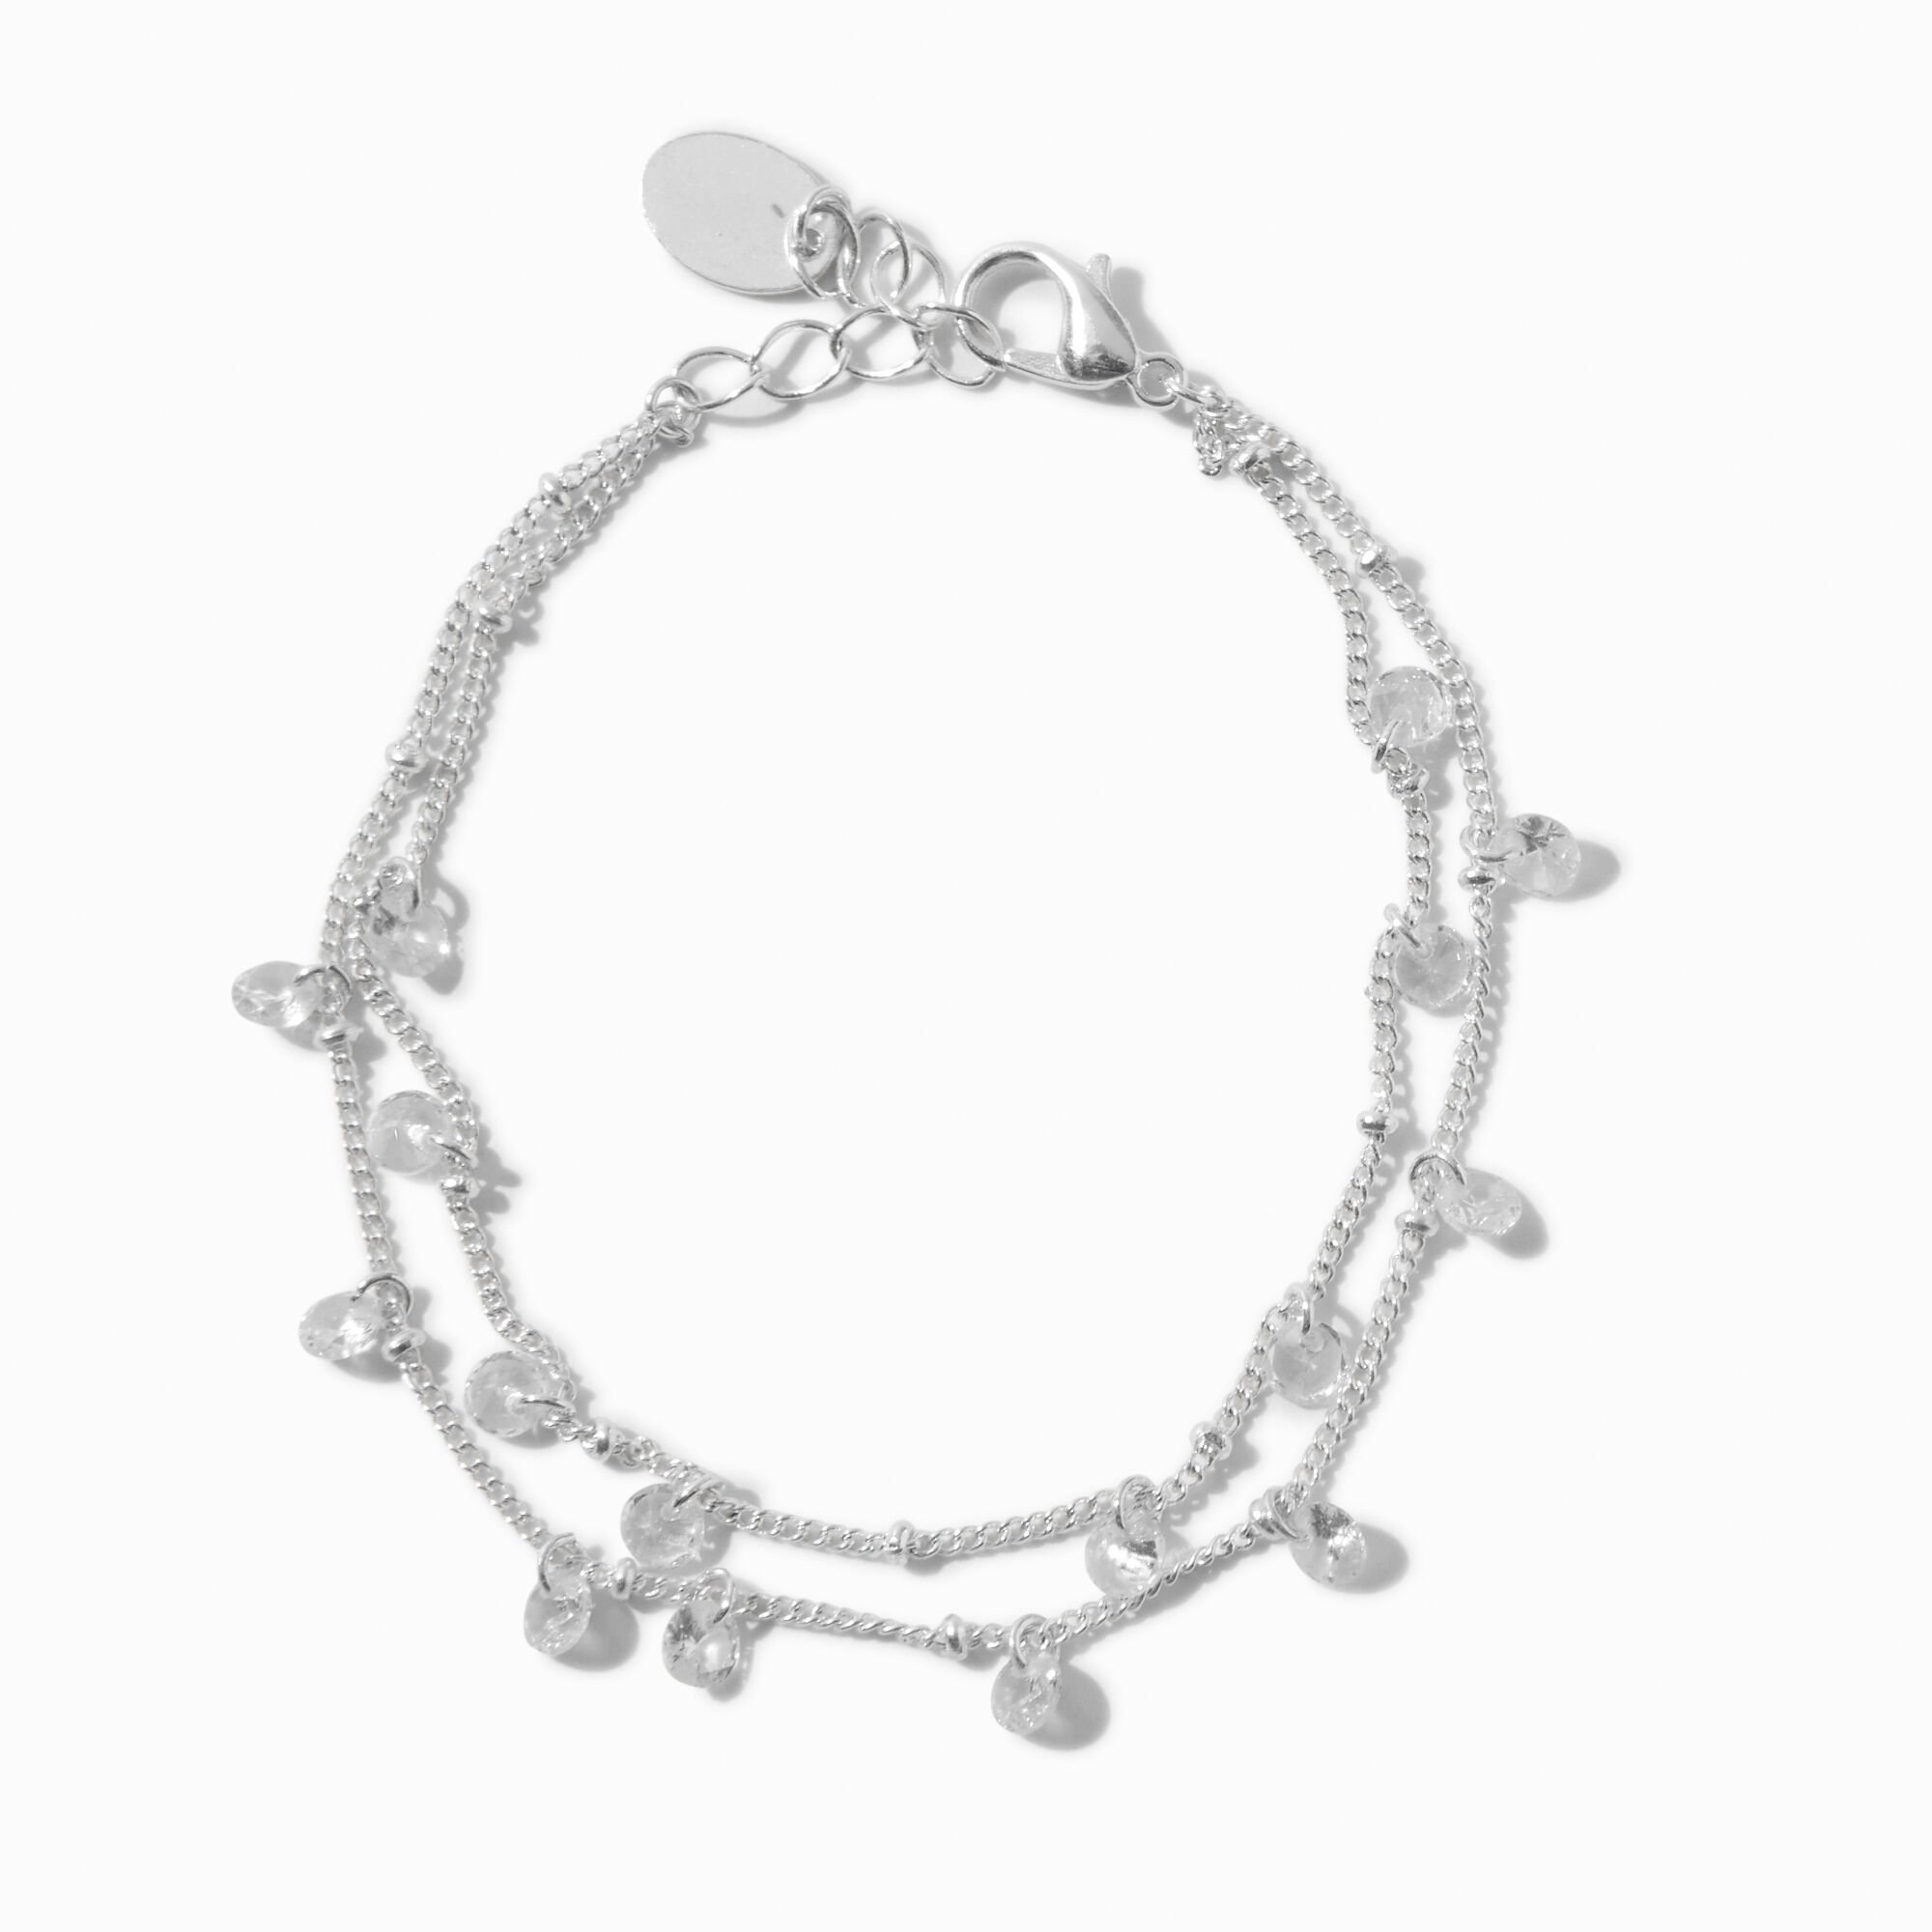 View Claires Tone Crystal Confetti Charm MultiStrand Bracelet Silver information